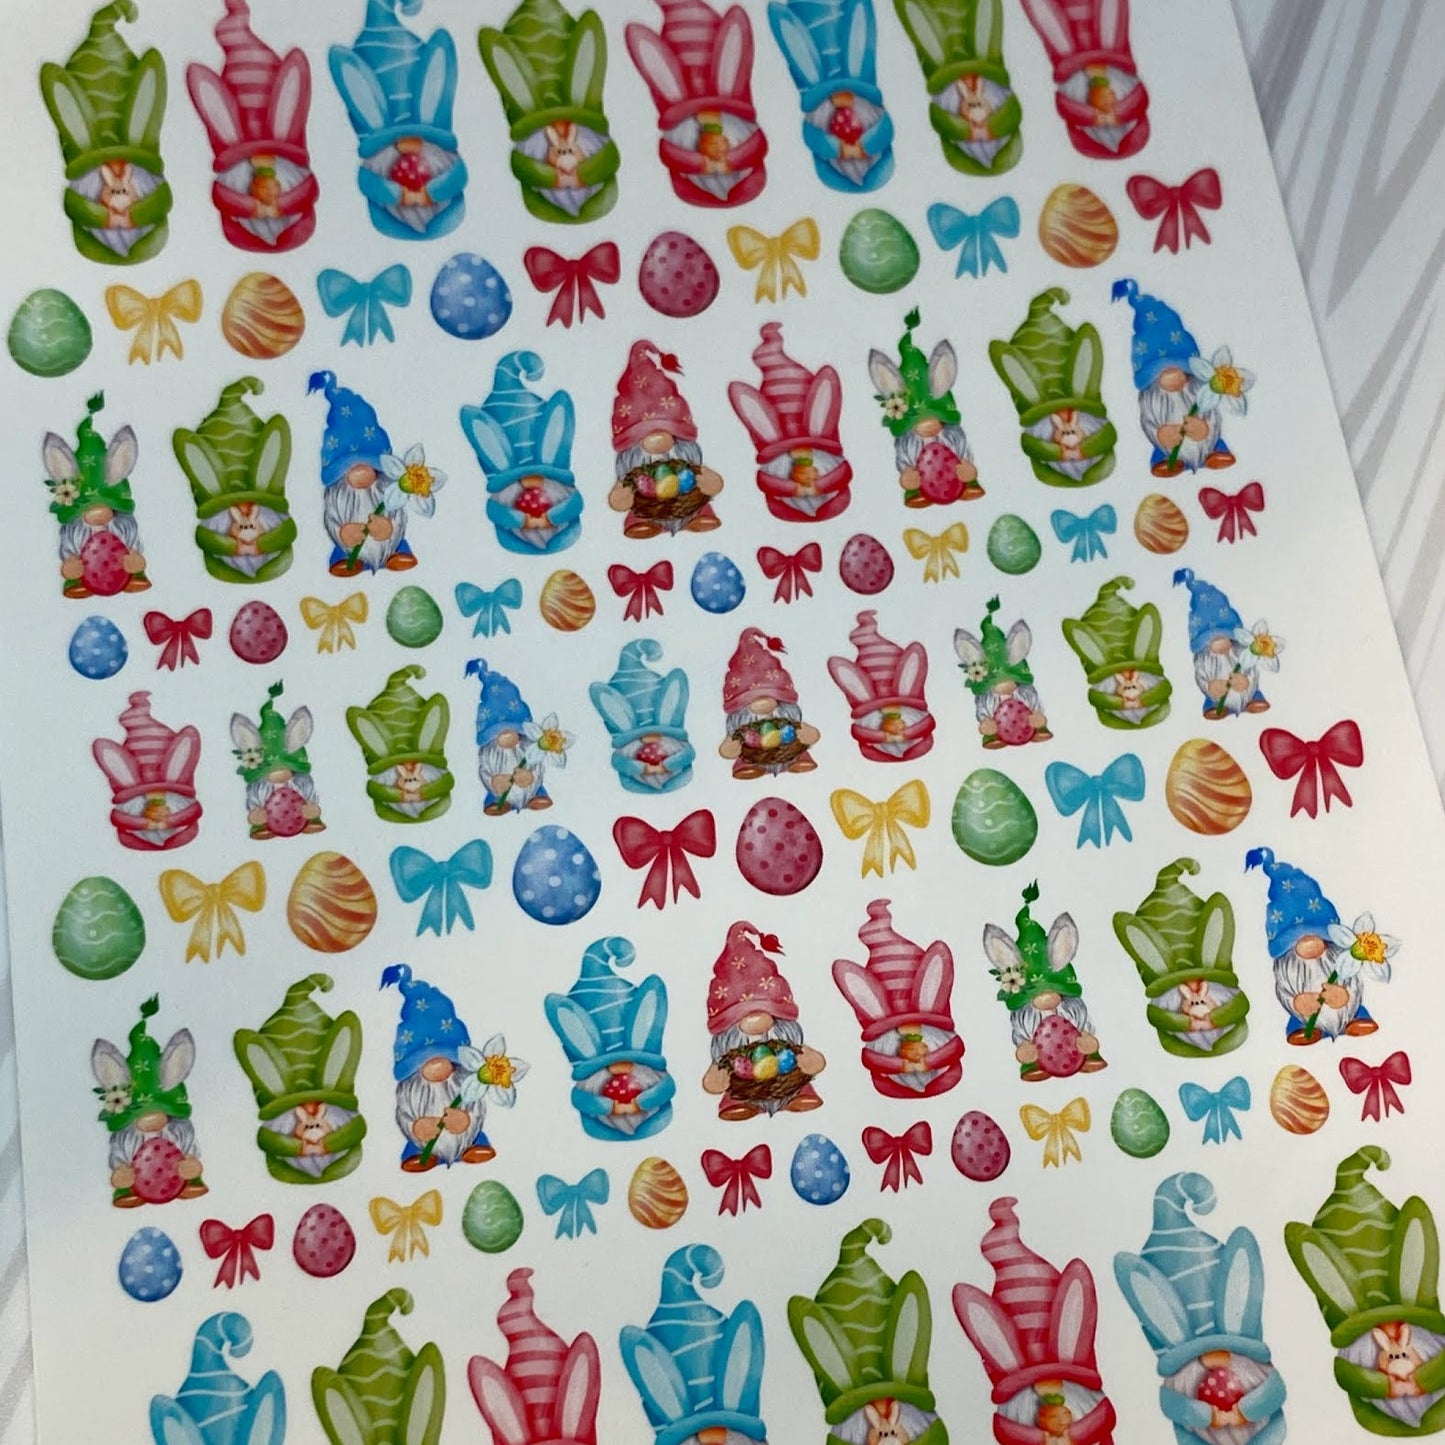 Hey There Gnomie!- Easter Nail Art Decals